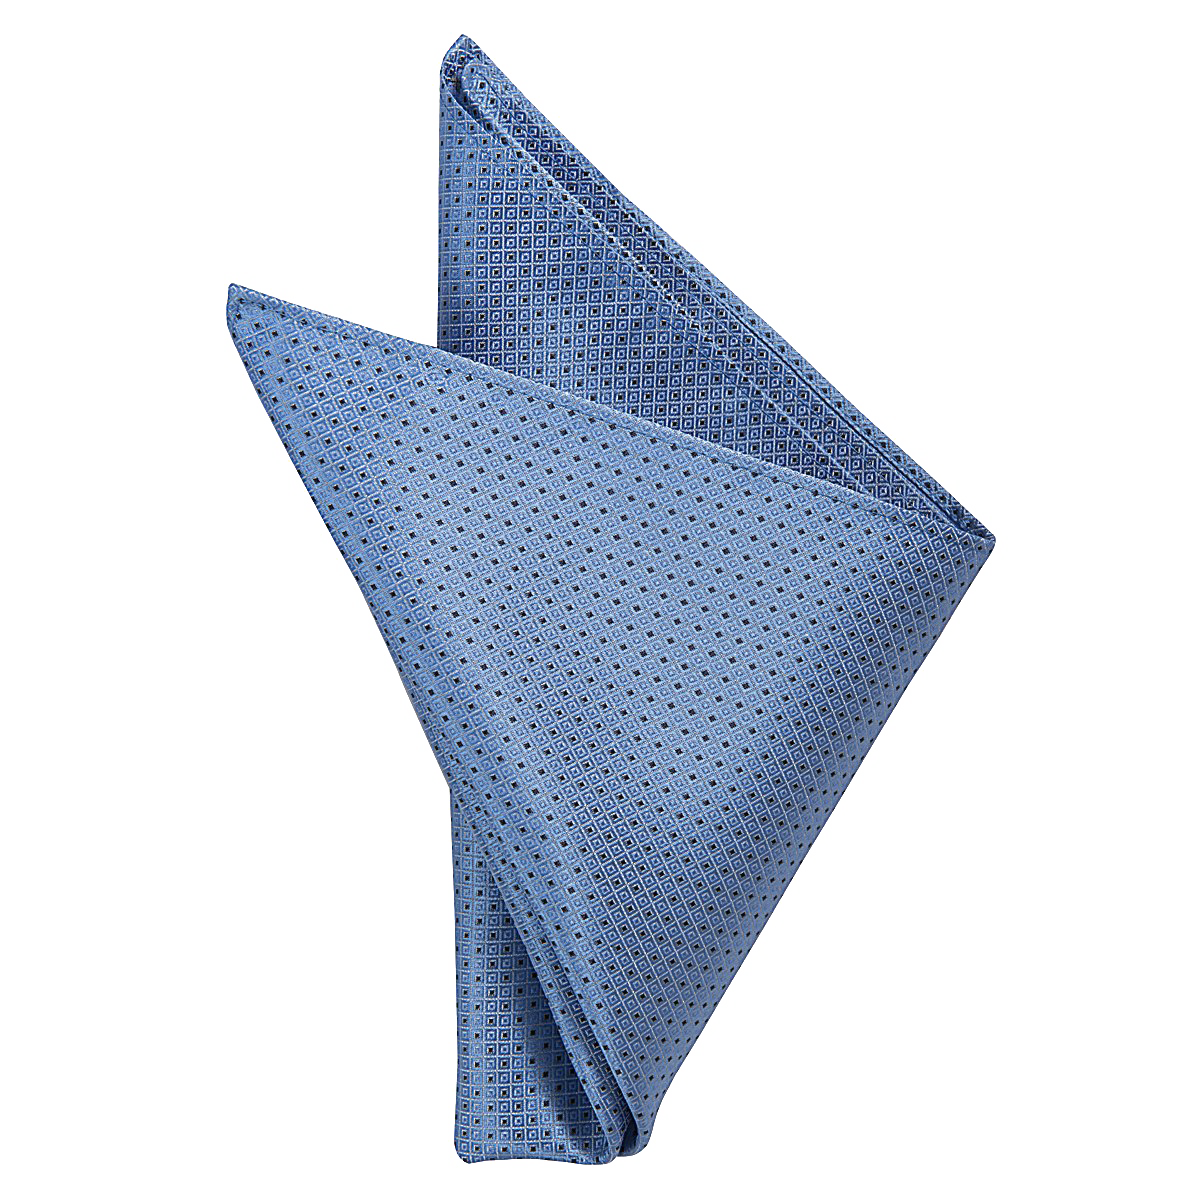 Handkerchief PNG HD and Transparent